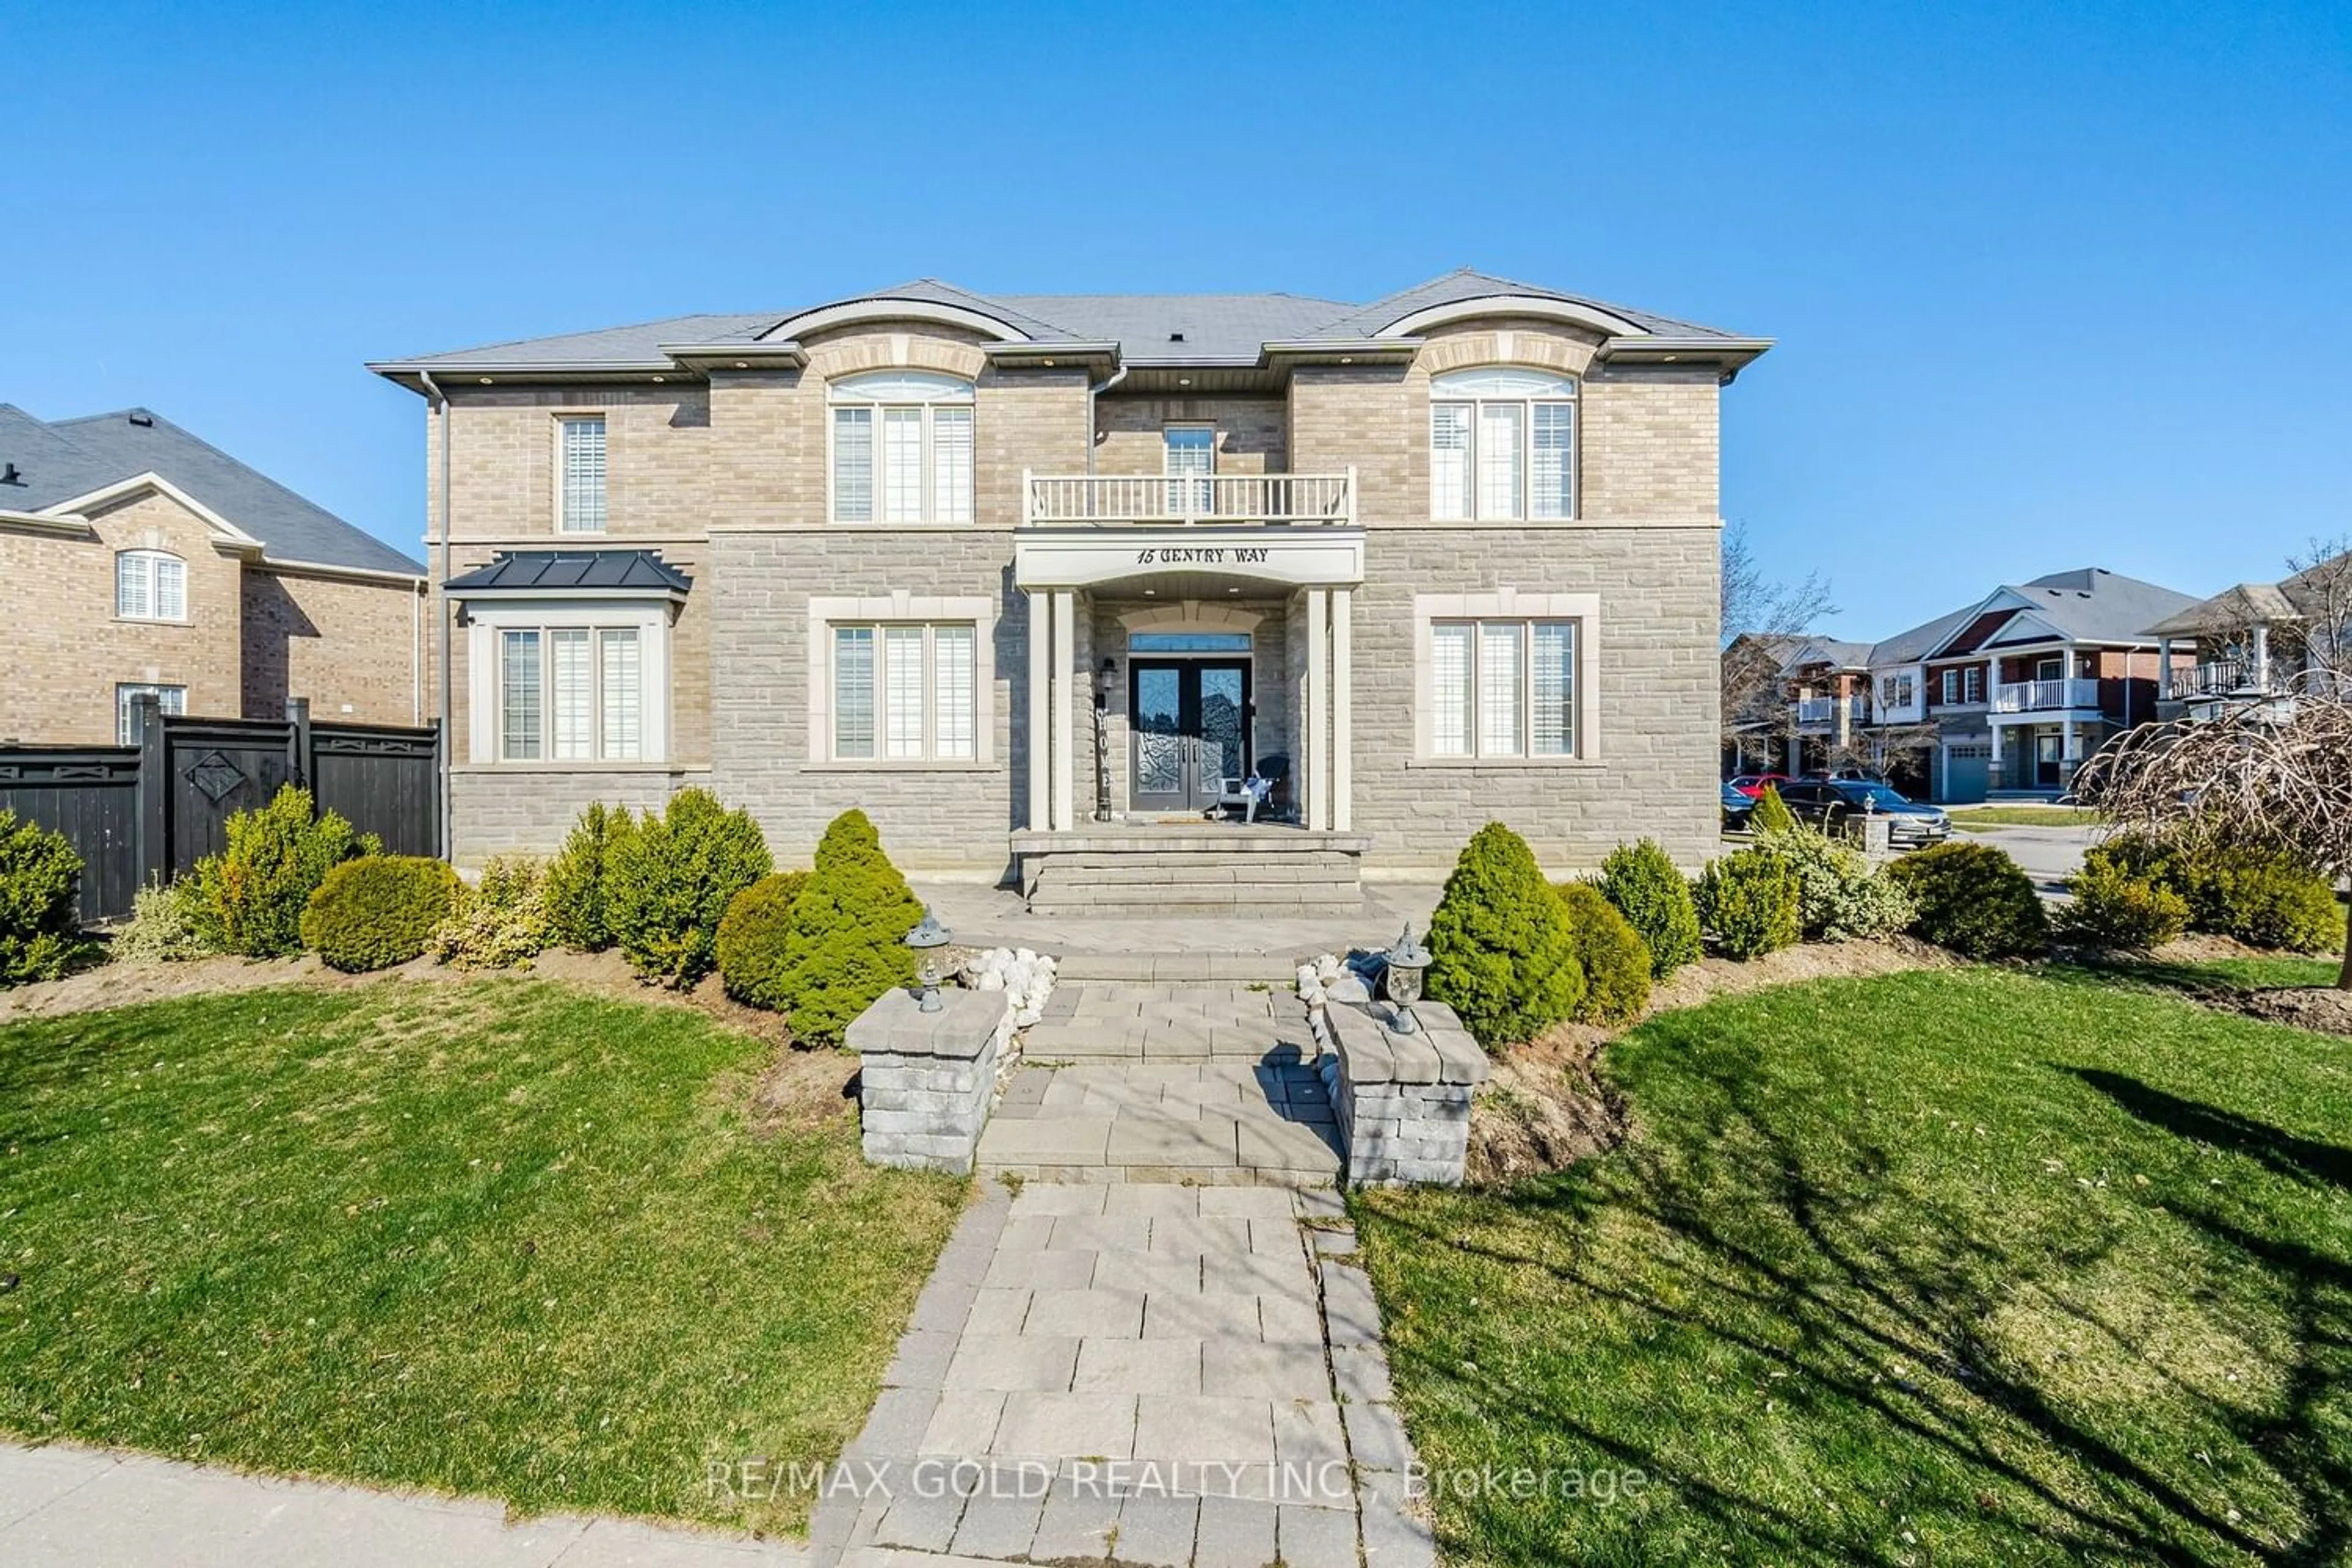 Frontside or backside of a home for 15 Gentry Way, Brampton Ontario L6P 3N5